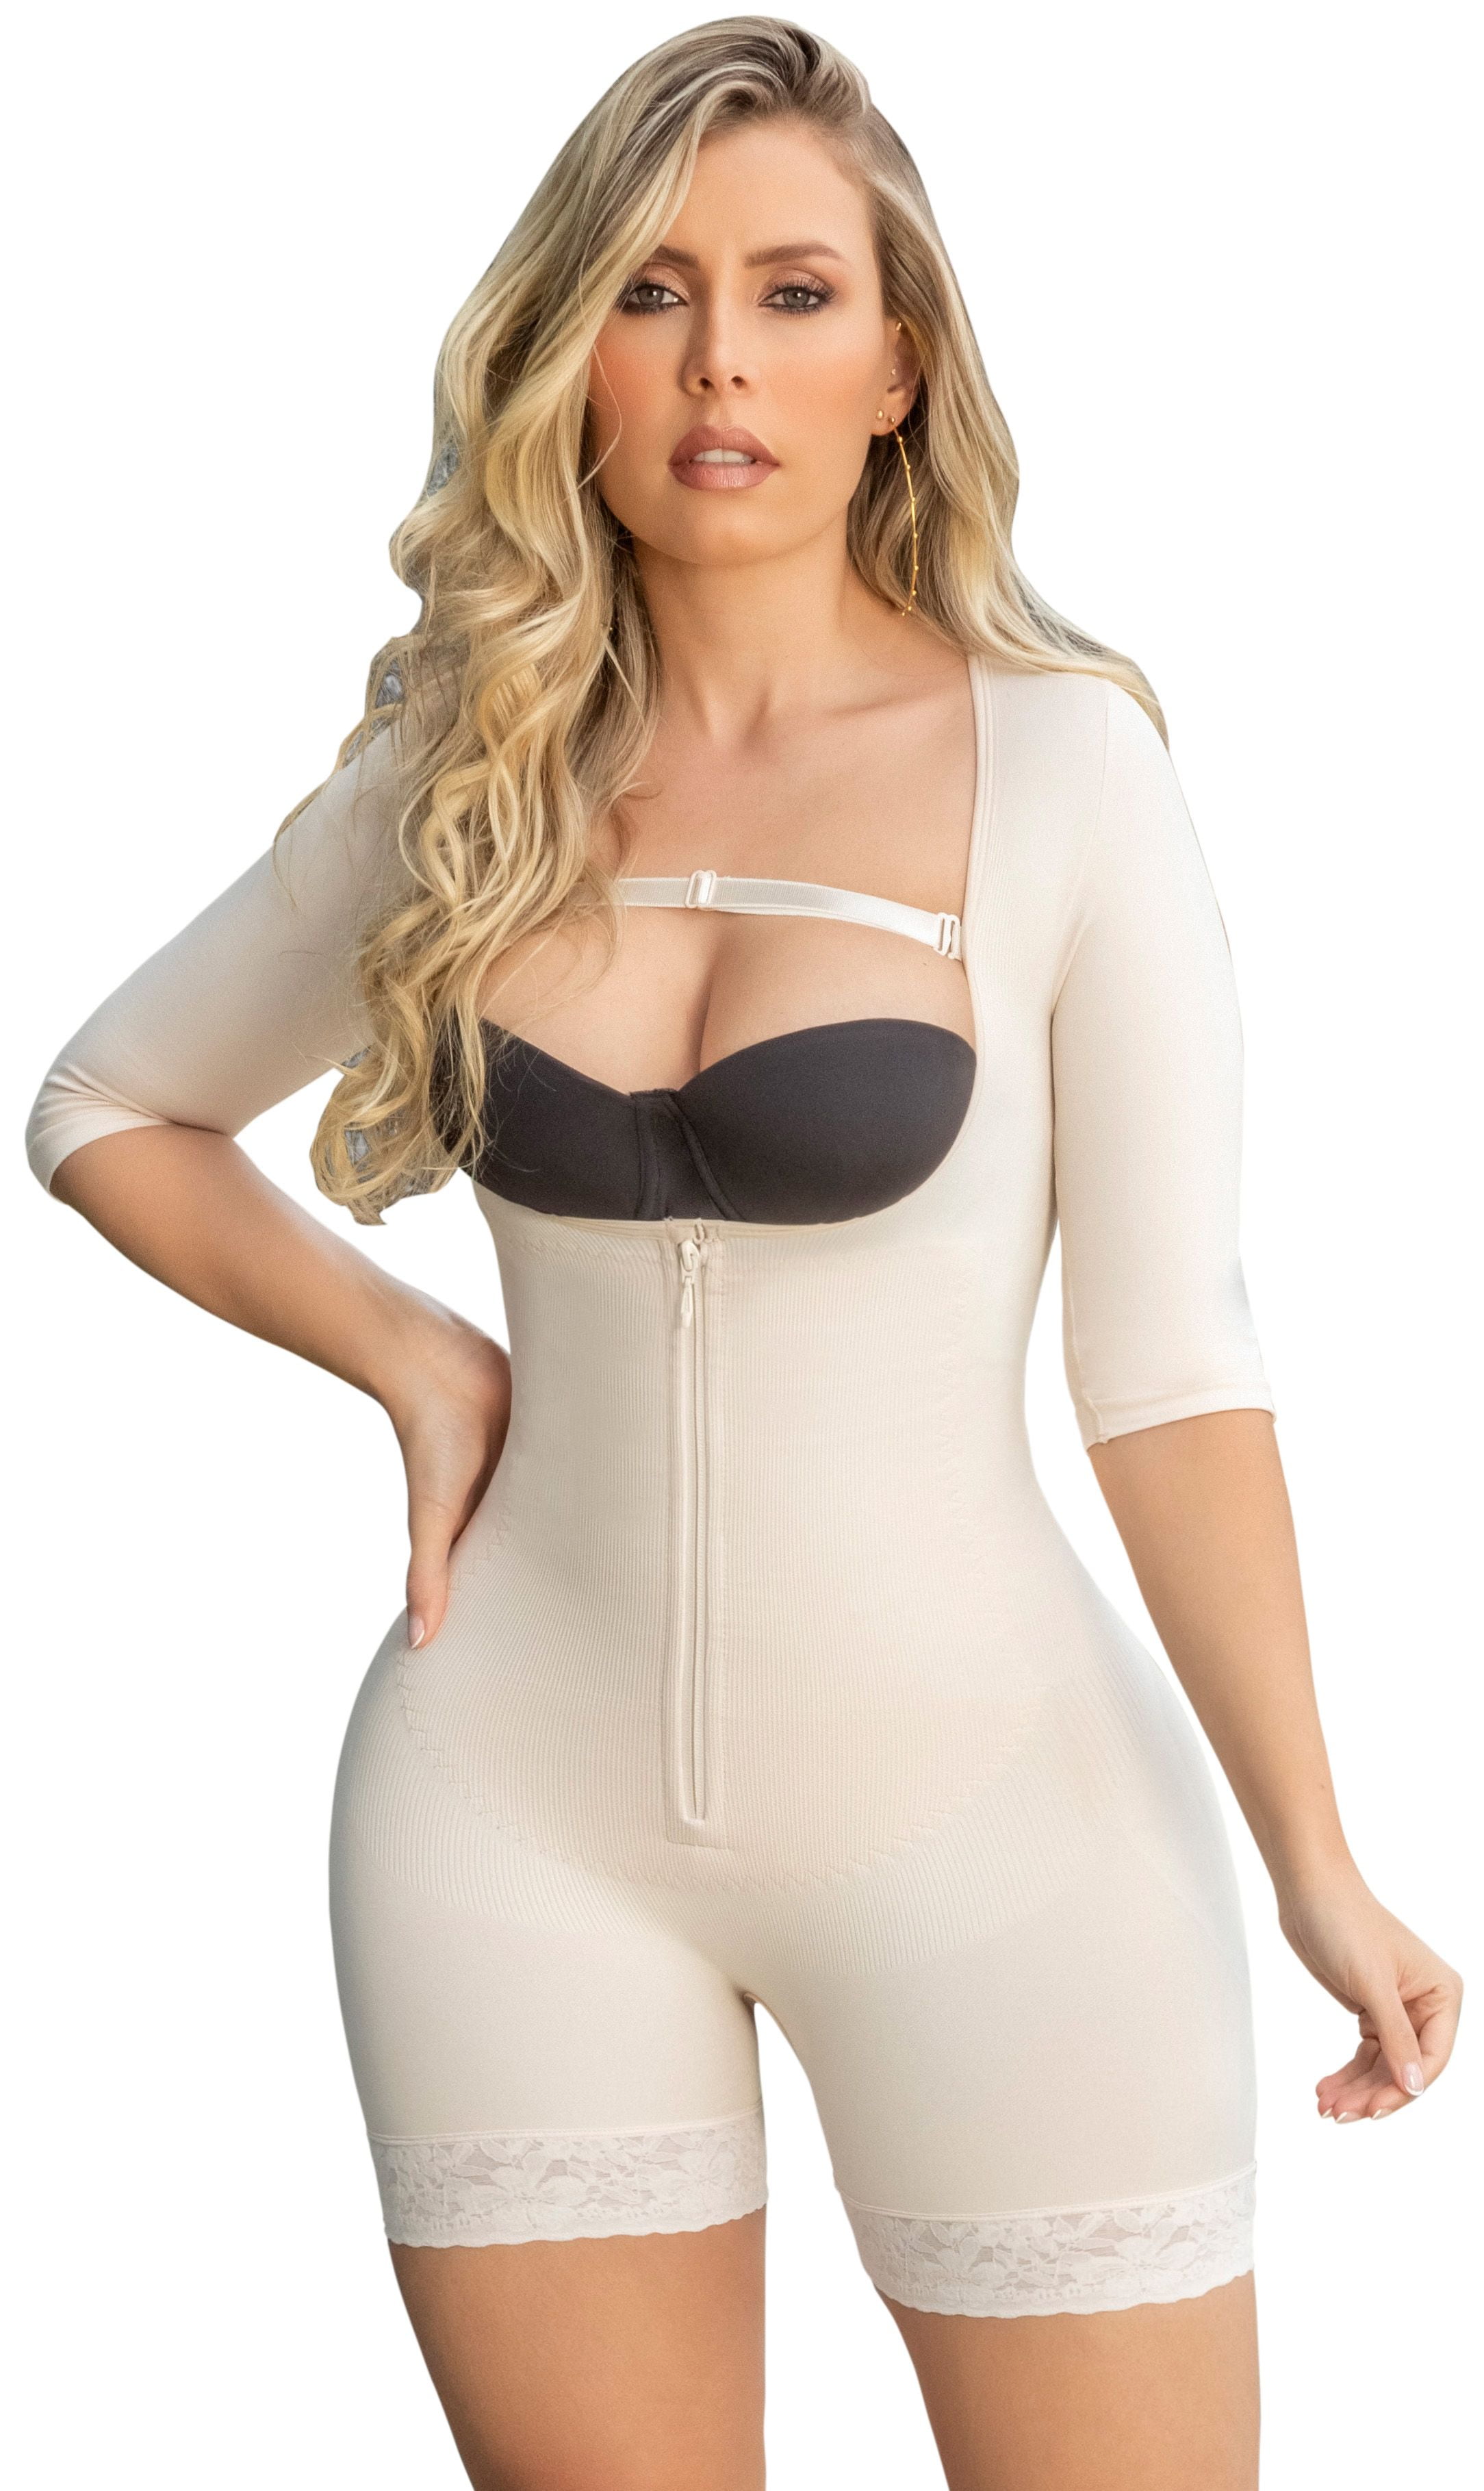 Butt Lifter Back Support Women Girdle with Latex Sleeves Fajas Reductoras  Colombianas Moldeadoras Seamless 628N by Fiorella Shapewear